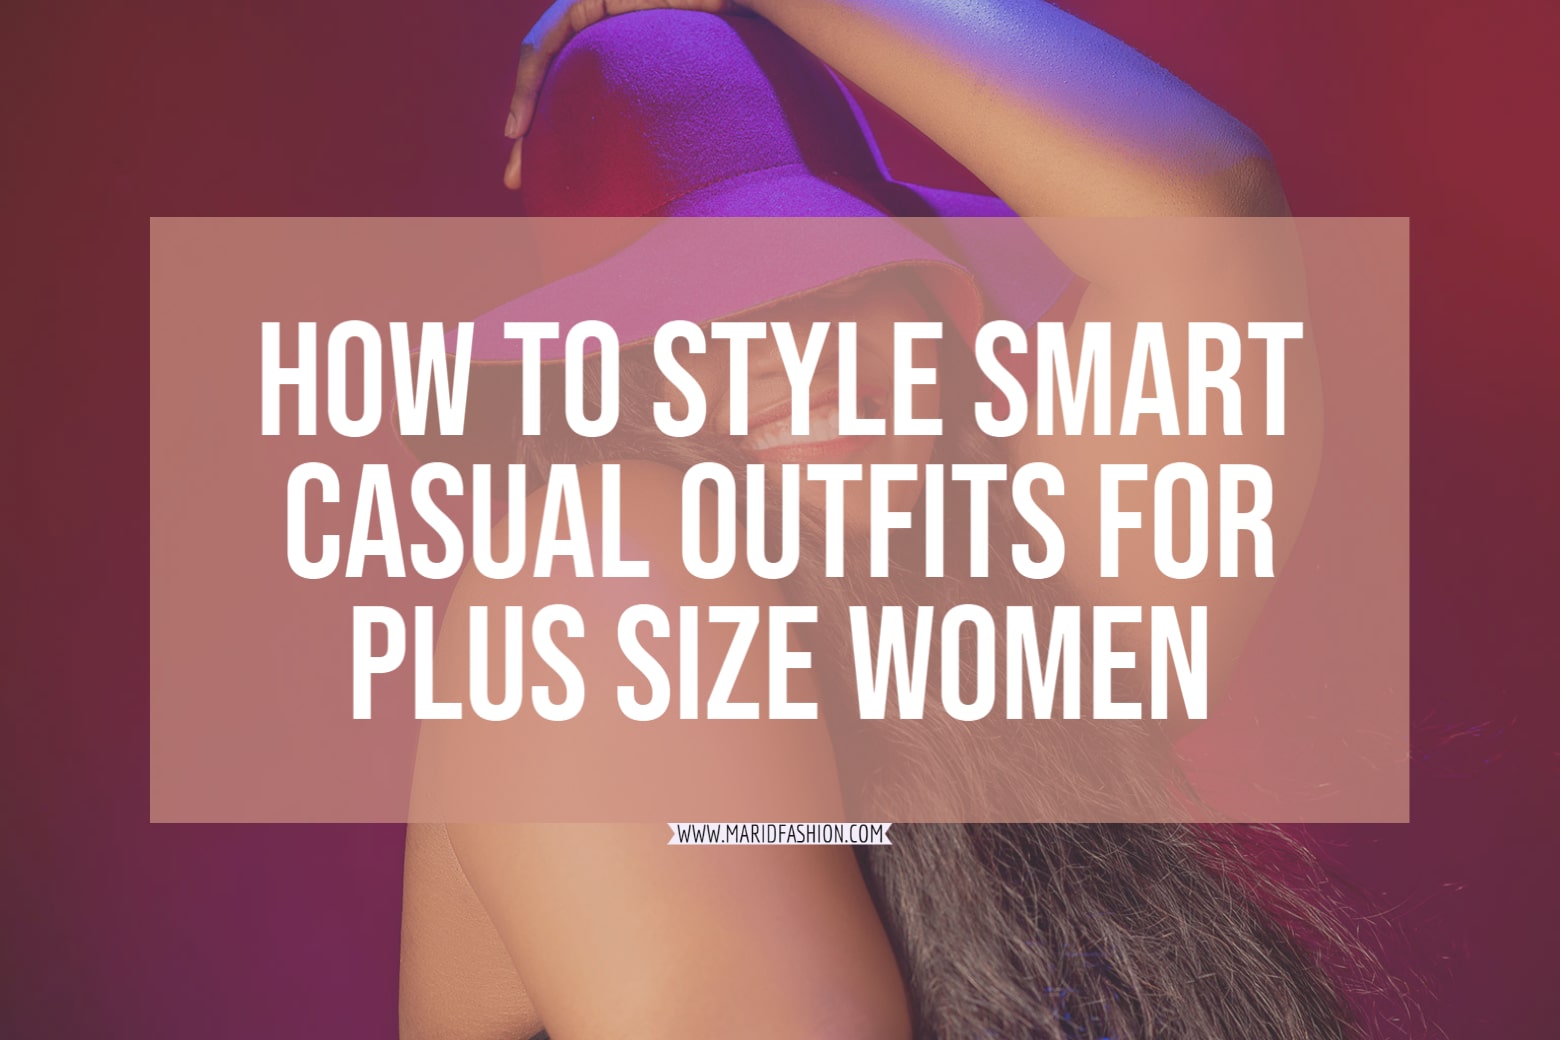 How to Create Smart Casual Plus Size Women’s Outfits in Chic Ways